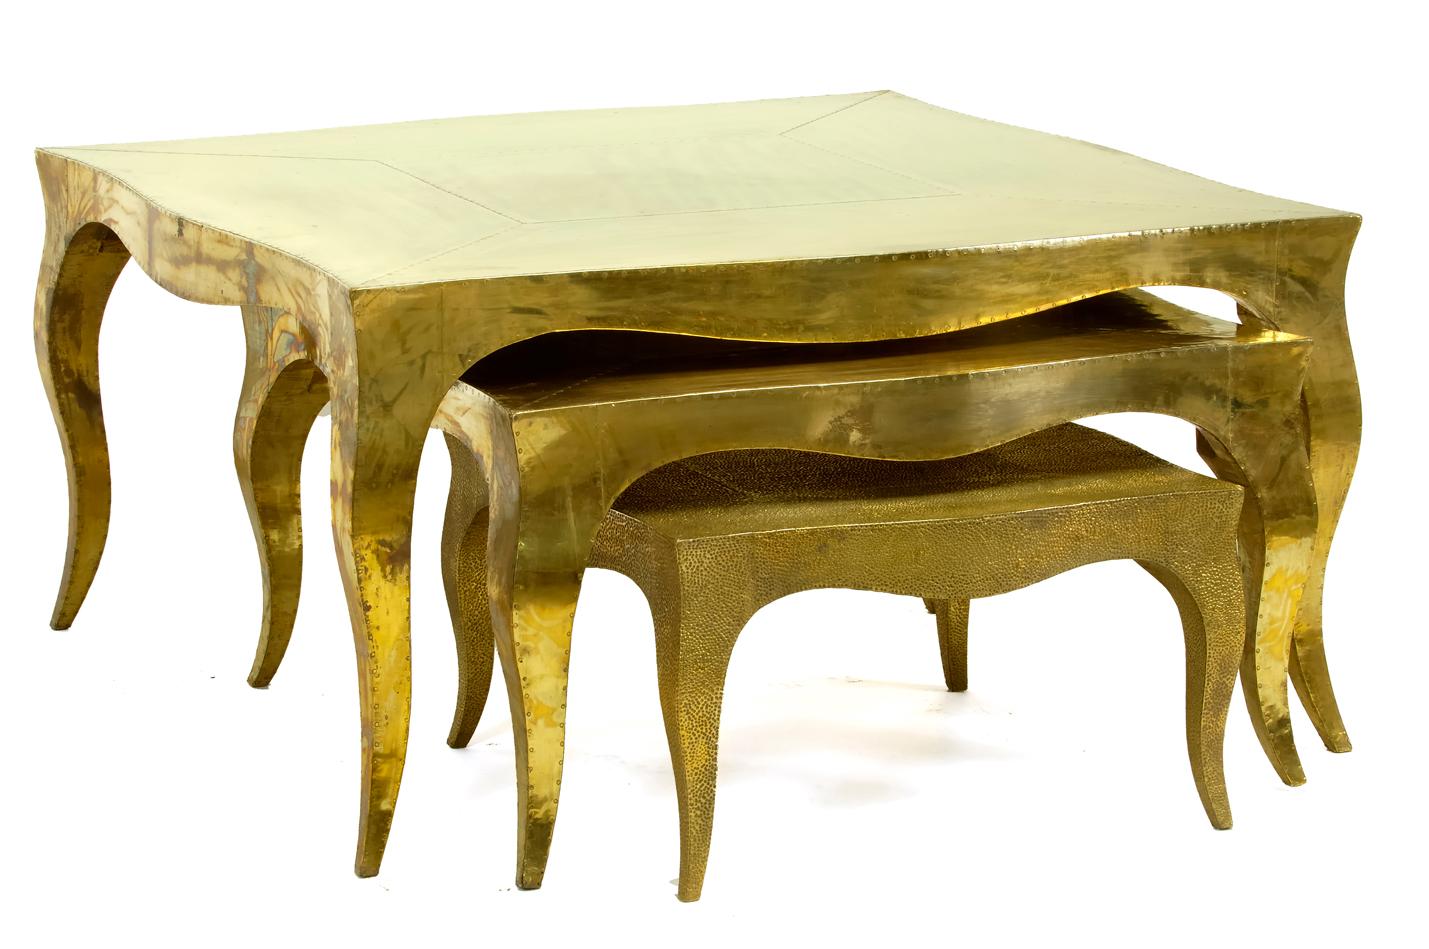 Louise Art Deco Nesting Tables Smooth Brass 18.5x18.5x10 inch by Paul M. en vente 7